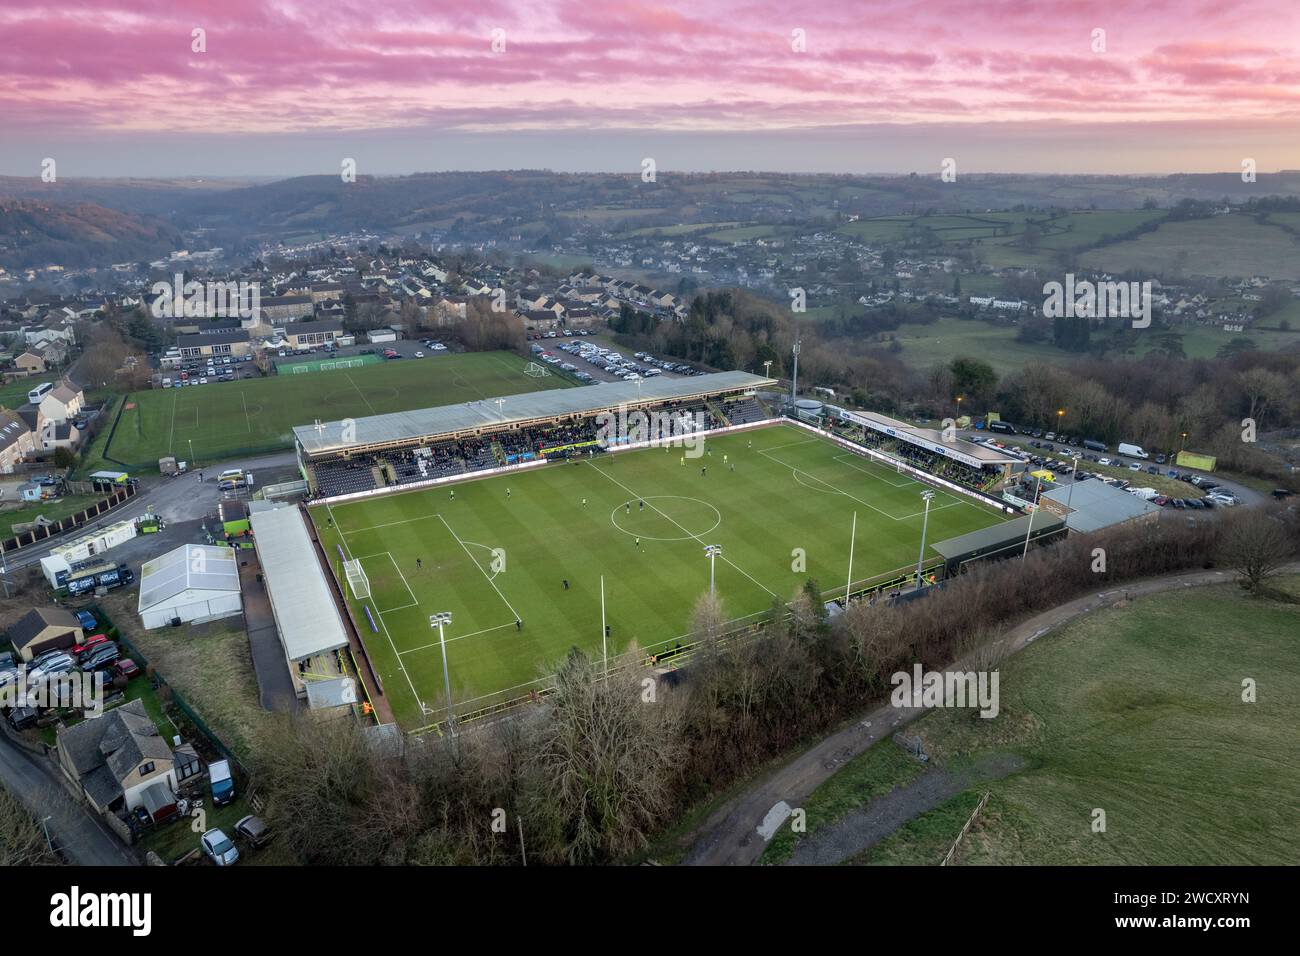 The New Lawn in Nailsworth, Gloucestershire home of football club Forest Green Rovers, UK Stock Photo